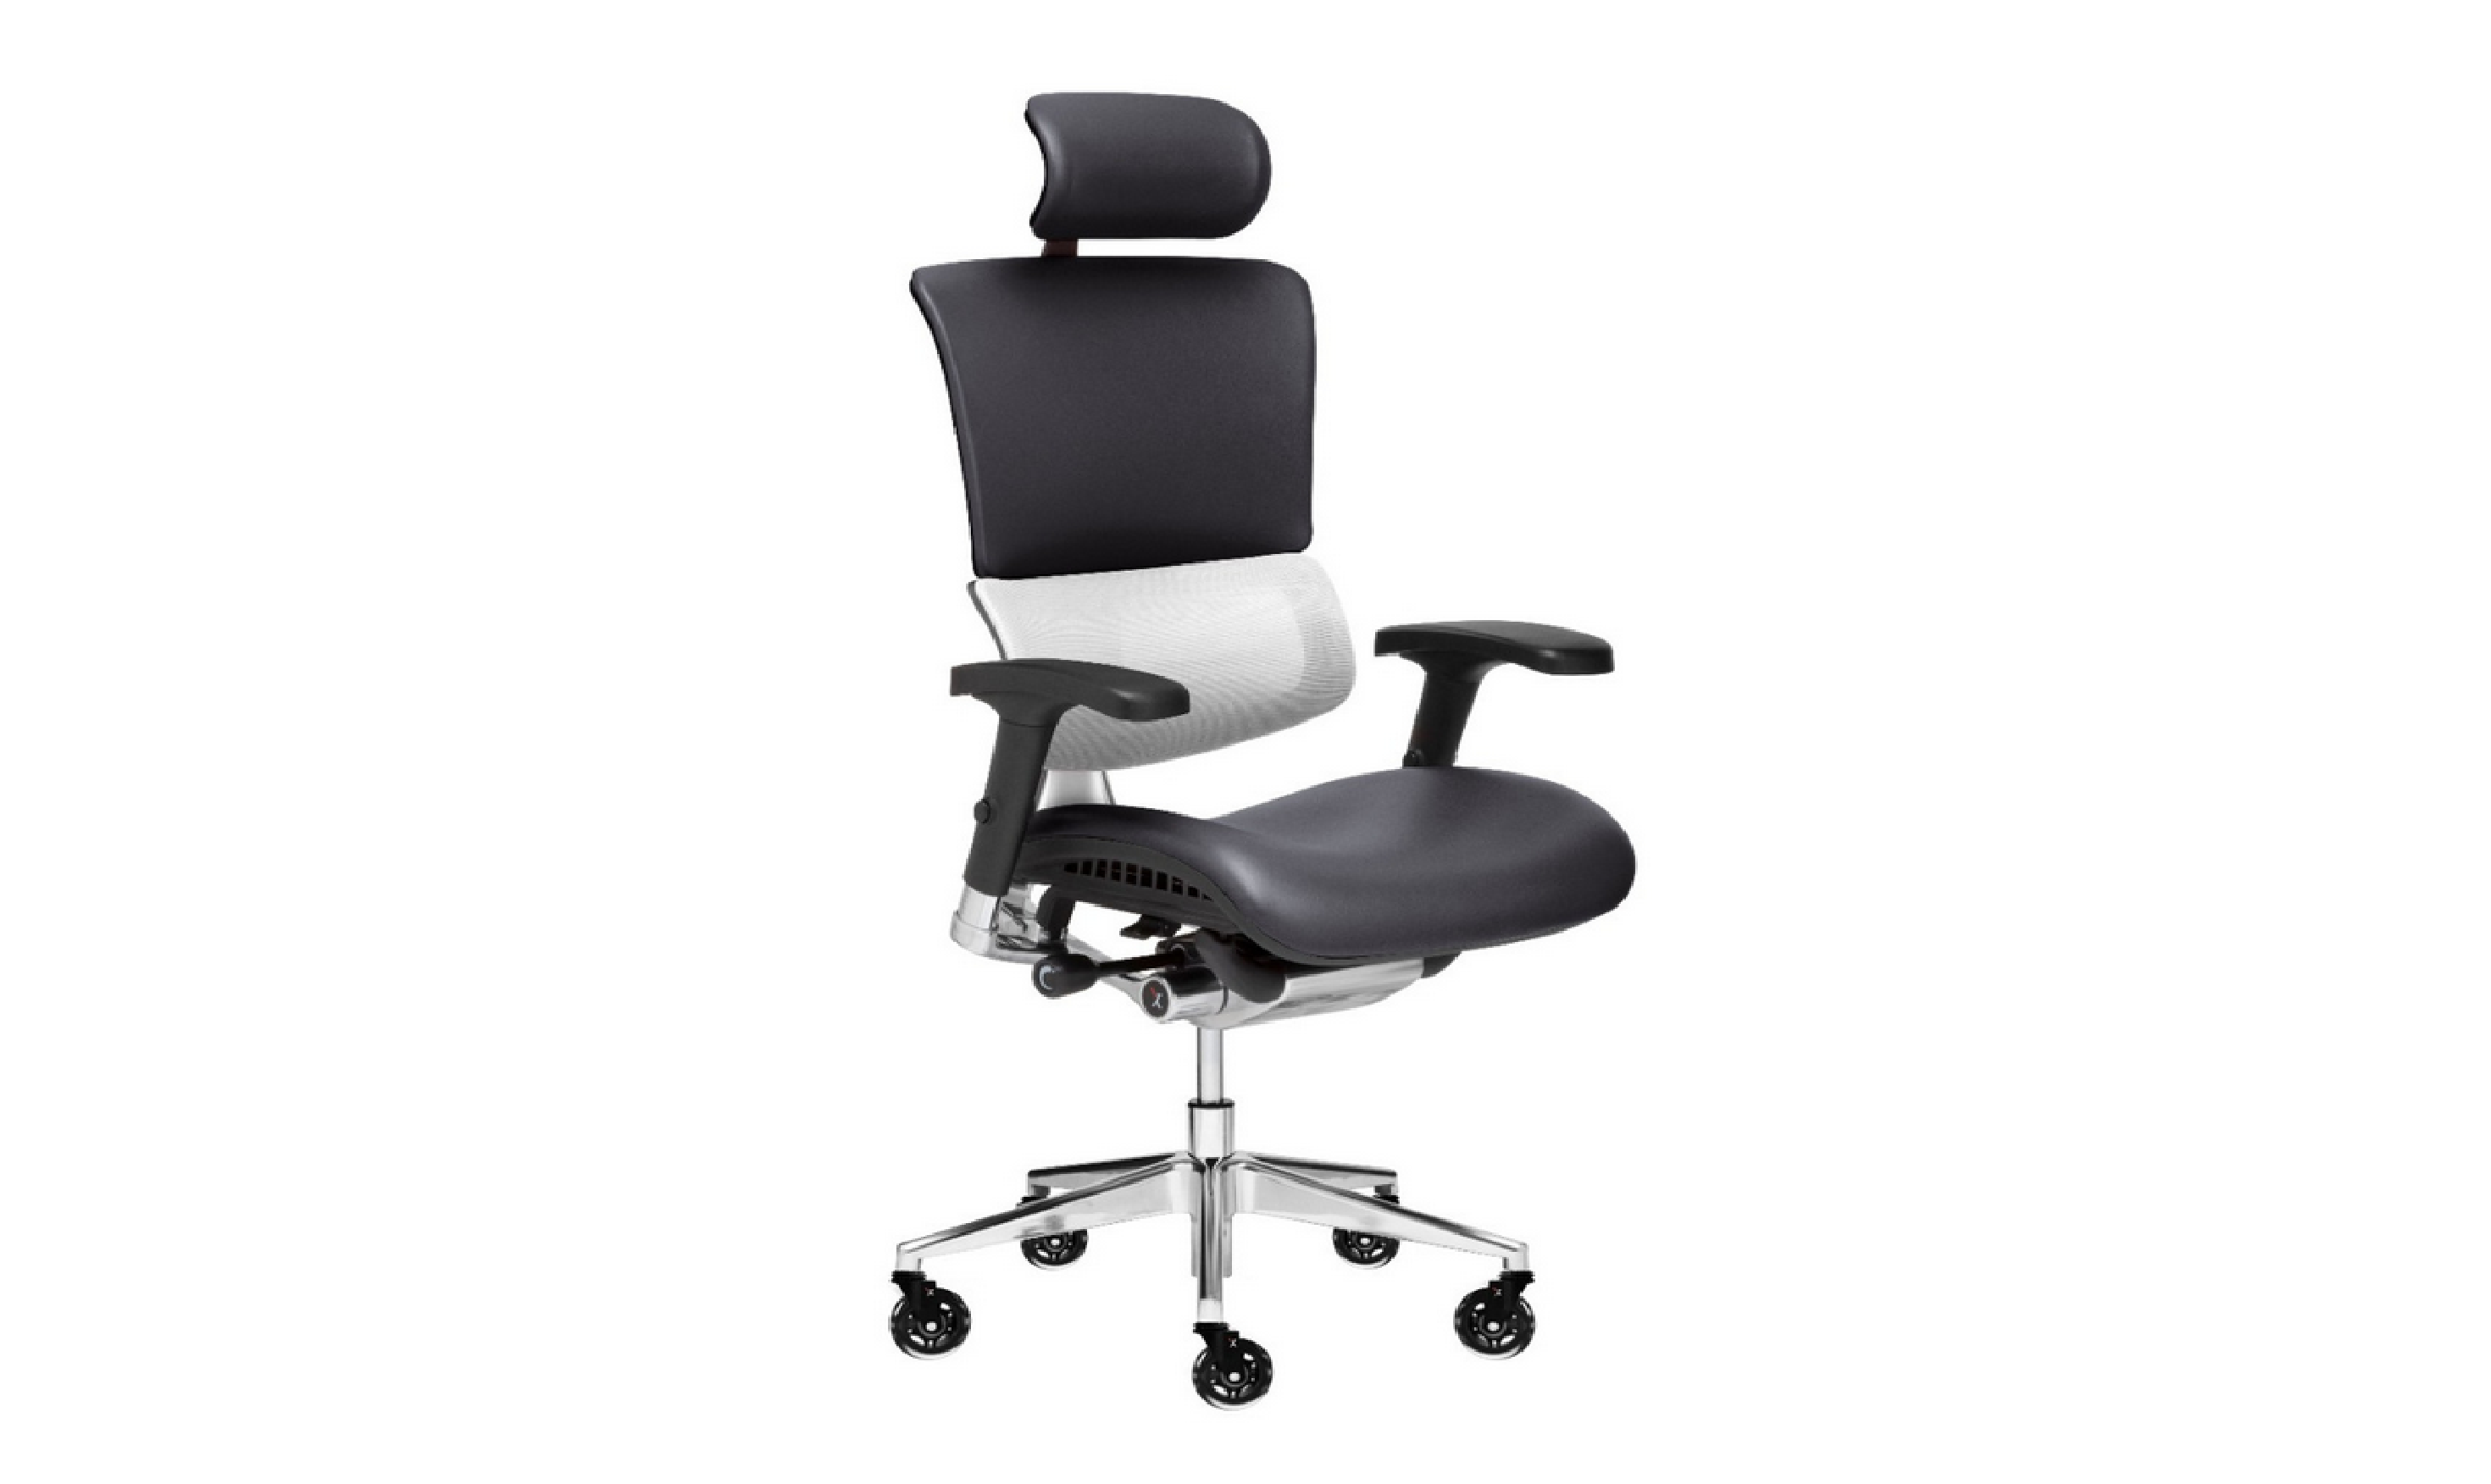 X-Chair X3 ATR Mgmt Chair Review: A Do-It-All, Comfortable Desk Chair